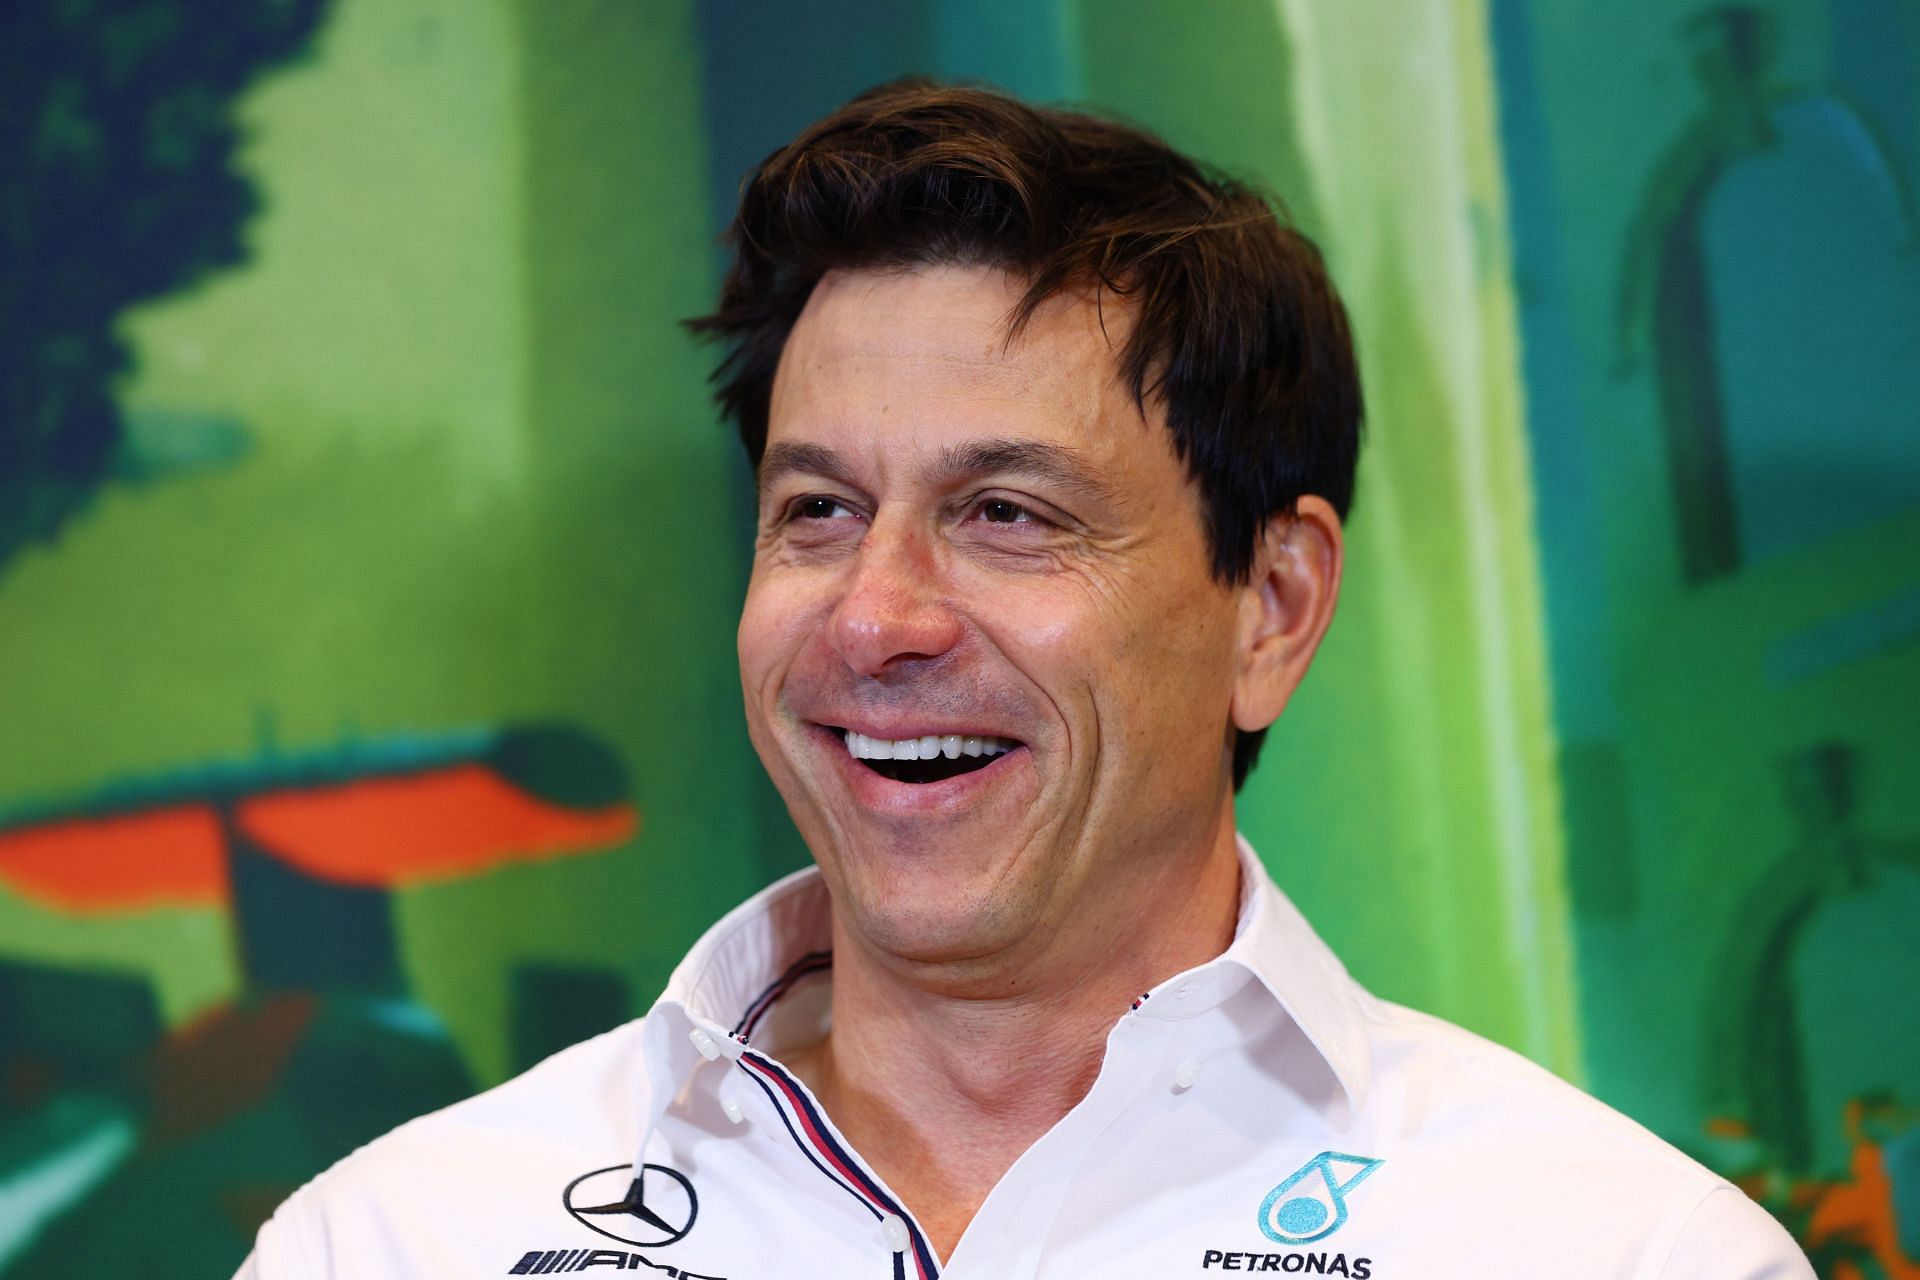 Mercedes GP Executive Director Toto Wolff looks on in the Team Principals Press Conference prior to final practice ahead of the F1 Grand Prix of Azerbaijan at Baku City Circuit on June 11, 2022 in Baku, Azerbaijan. (Photo by Clive Rose/Getty Images